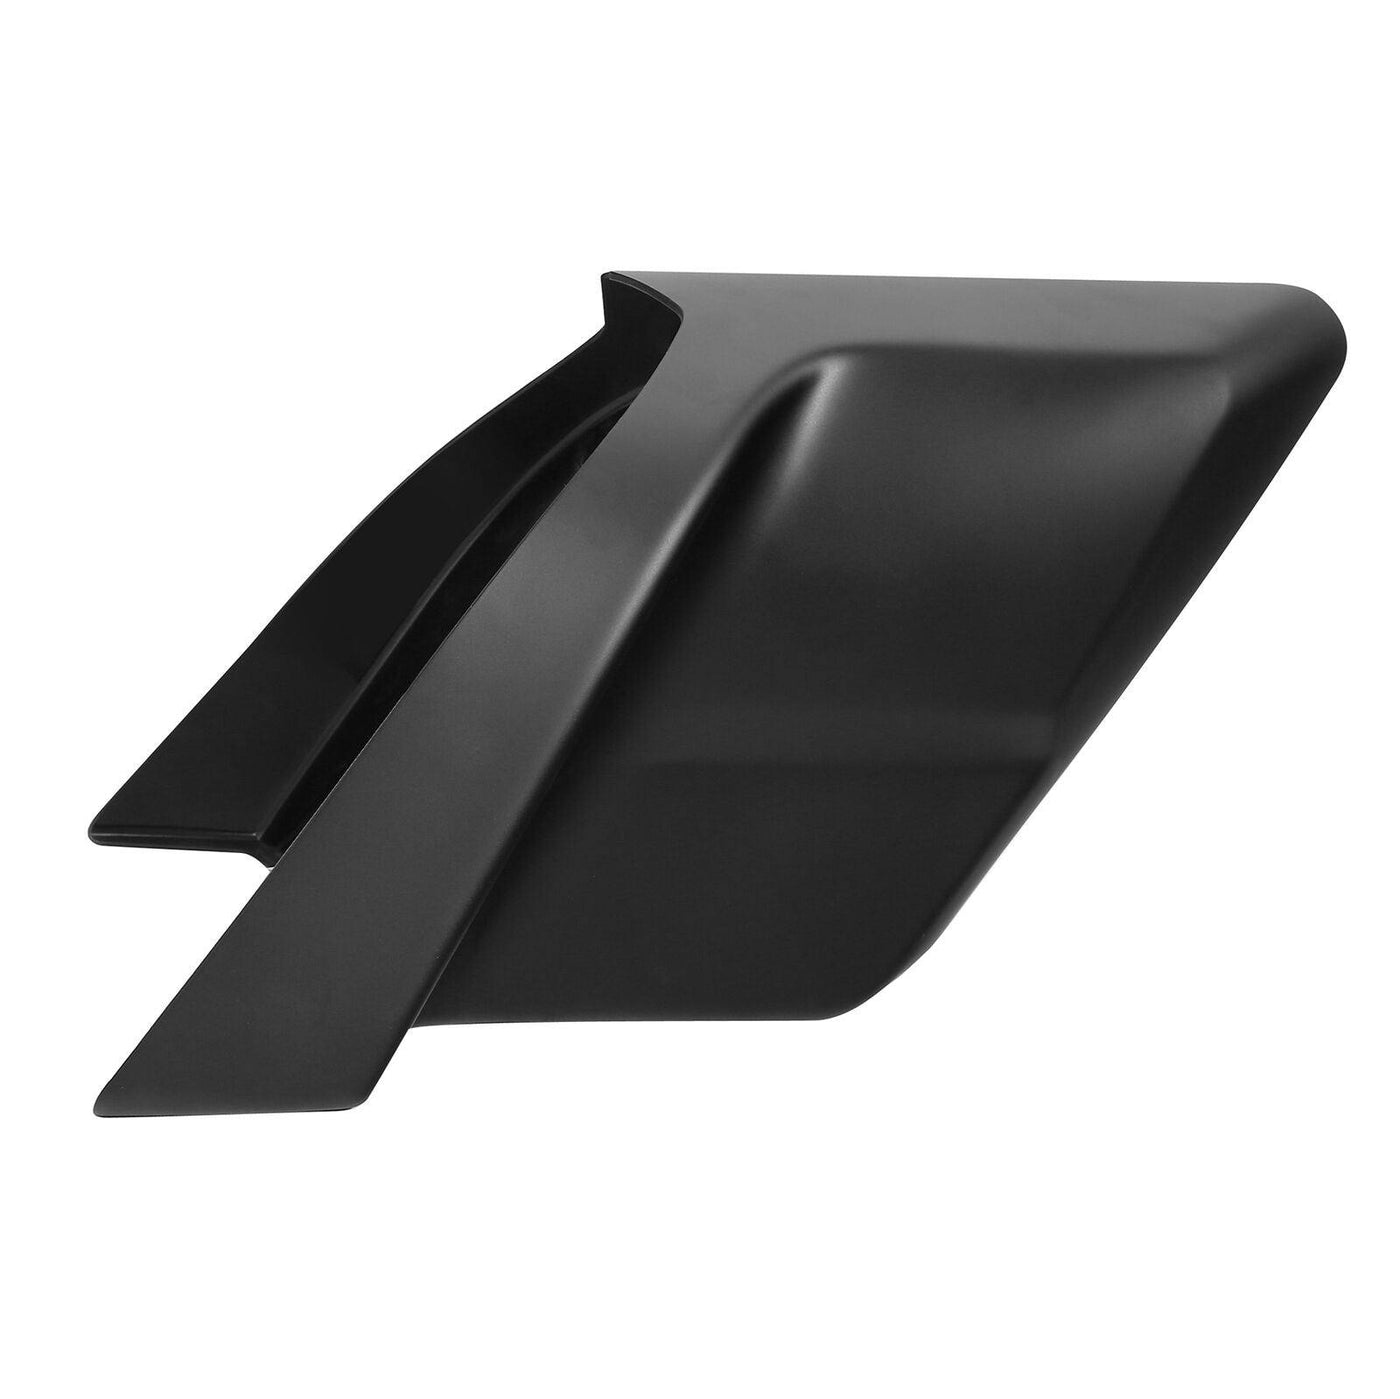 Stretched Side Fairing Cover Panel Fit For Harley Road King Street Glide 14-2022 - Moto Life Products